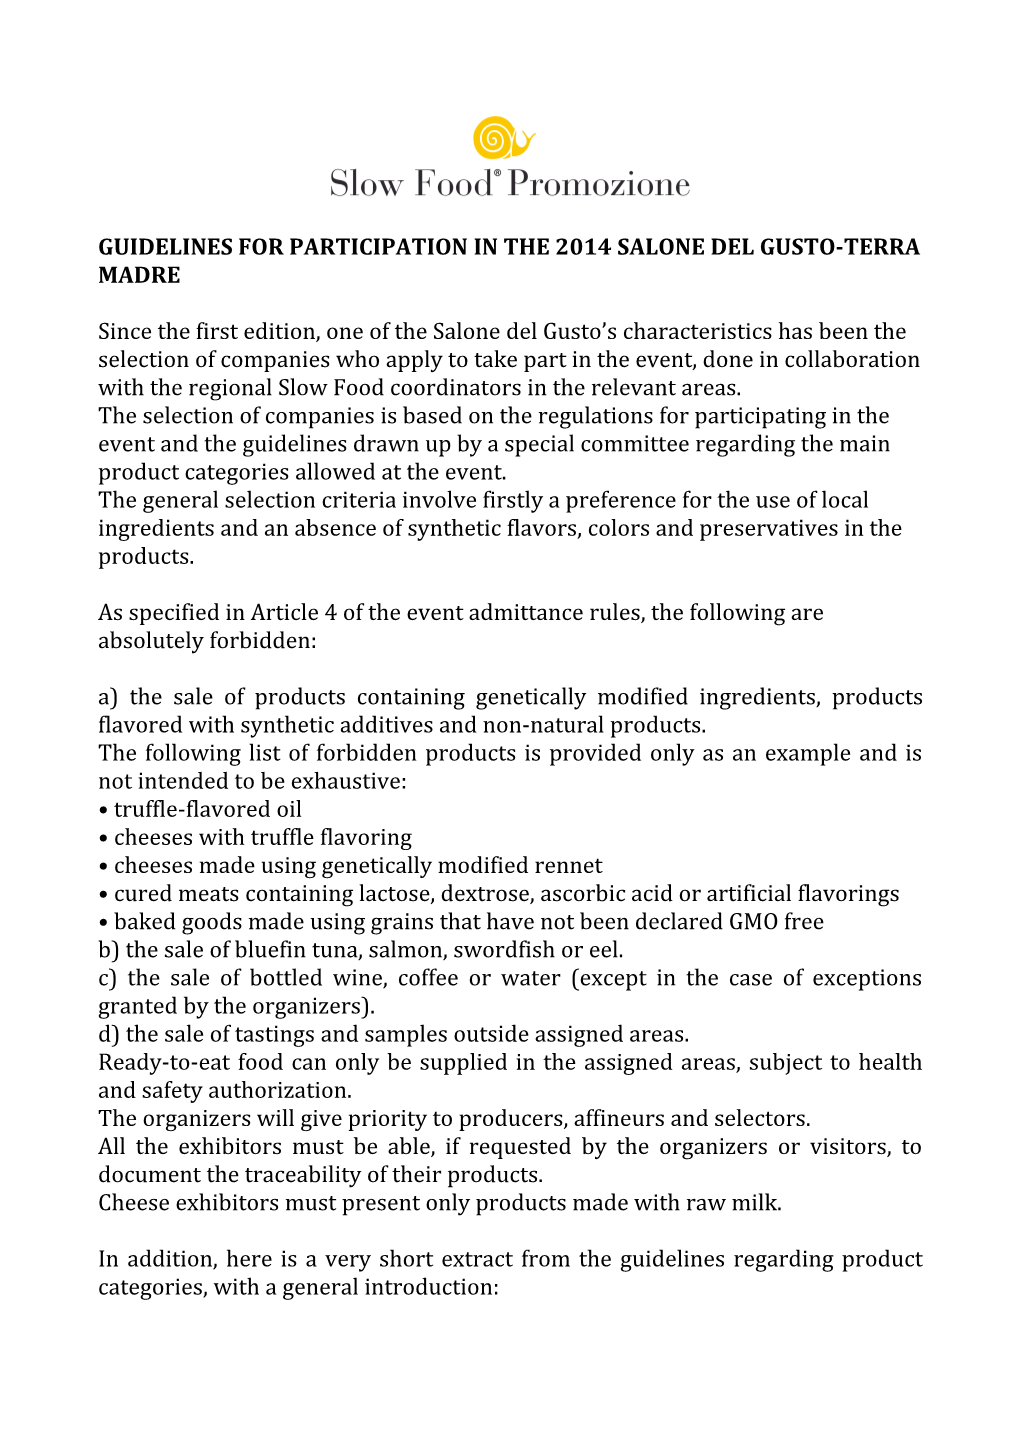 Guidelines for Participation in the 2014 Salone Del Gusto-Terra Madre